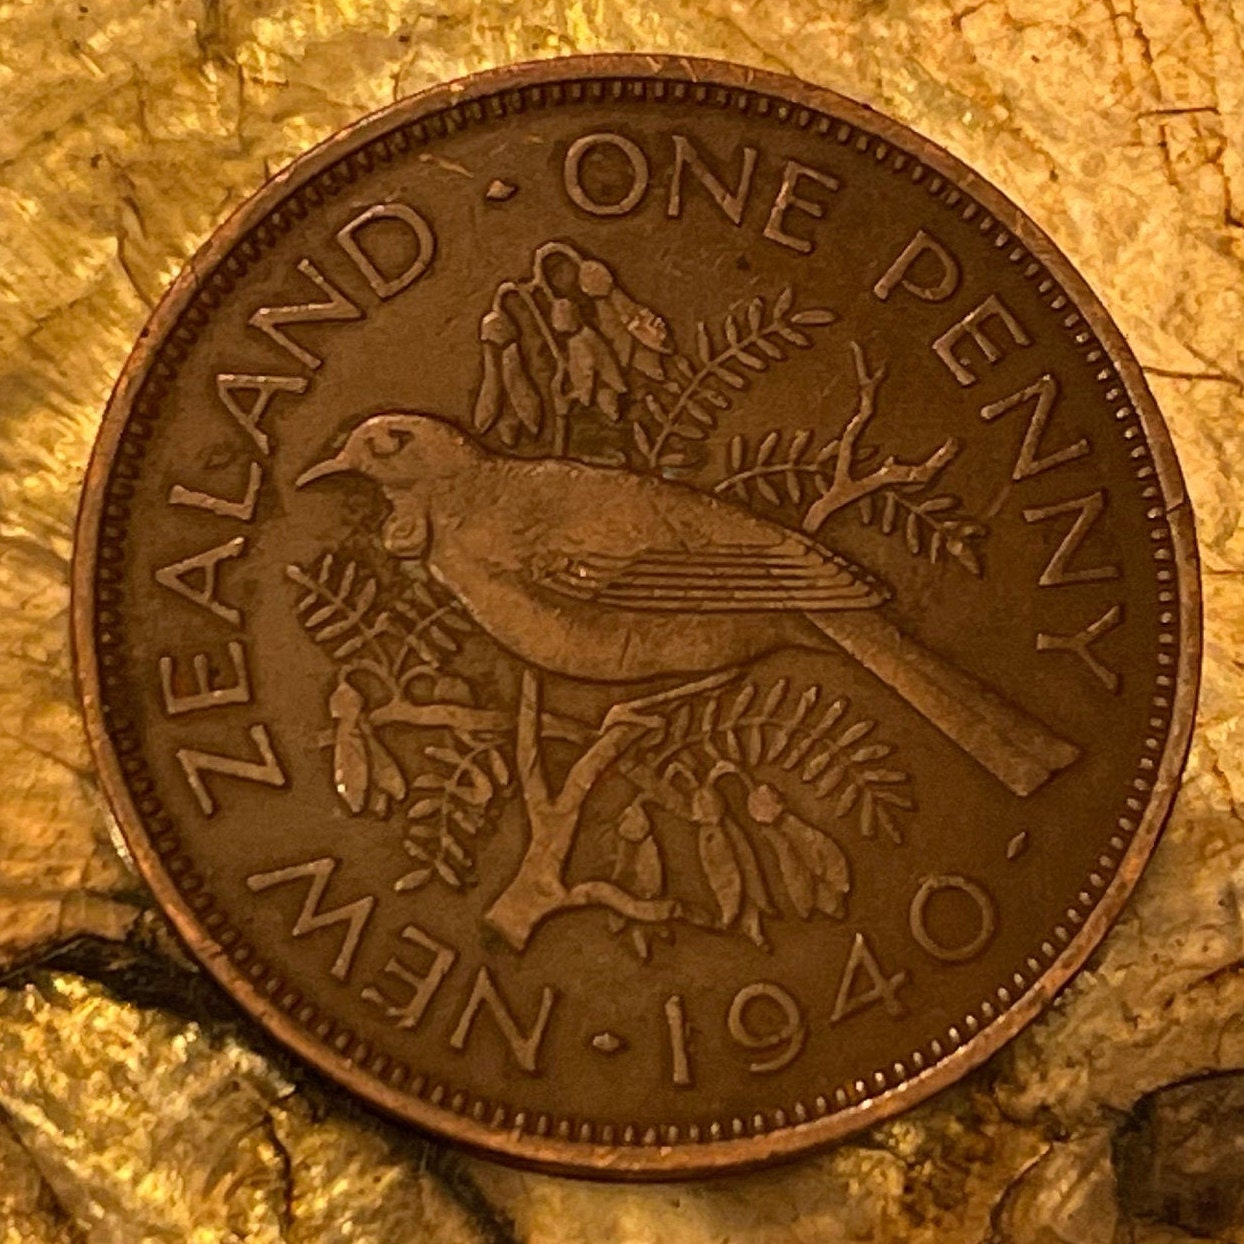 Tui Bird & King George VI 1 Penny New Zealand Authentic Coin Money for Jewelry and Craft Making (Maori) (Talking Bird) (Kowhai)